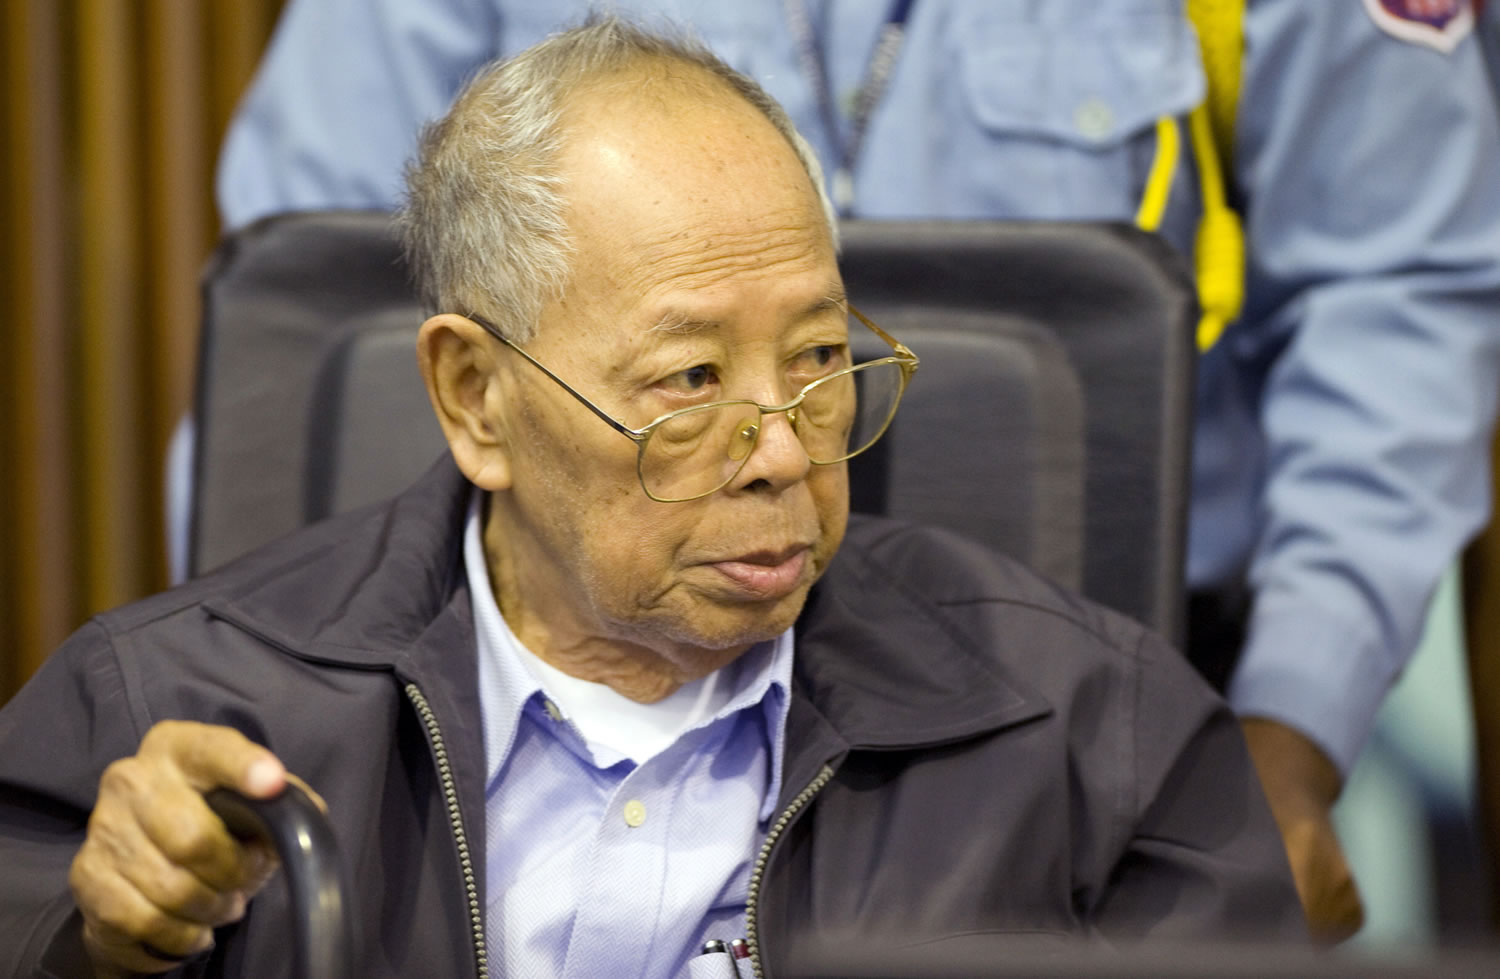 Former Khmer Rouge Foreign Minister Ieng Sary sits during the third day of a trial of the U.N.-backed war crimes tribunal in Phnom Penh, Cambodia. Ieng Sary co-founded Cambodia's brutal Khmer Rouge movement in 1970s, served as its public face abroad and decades later became one of its few leaders to face justice for the deaths of well over a million people. Sary died Thursday morning.